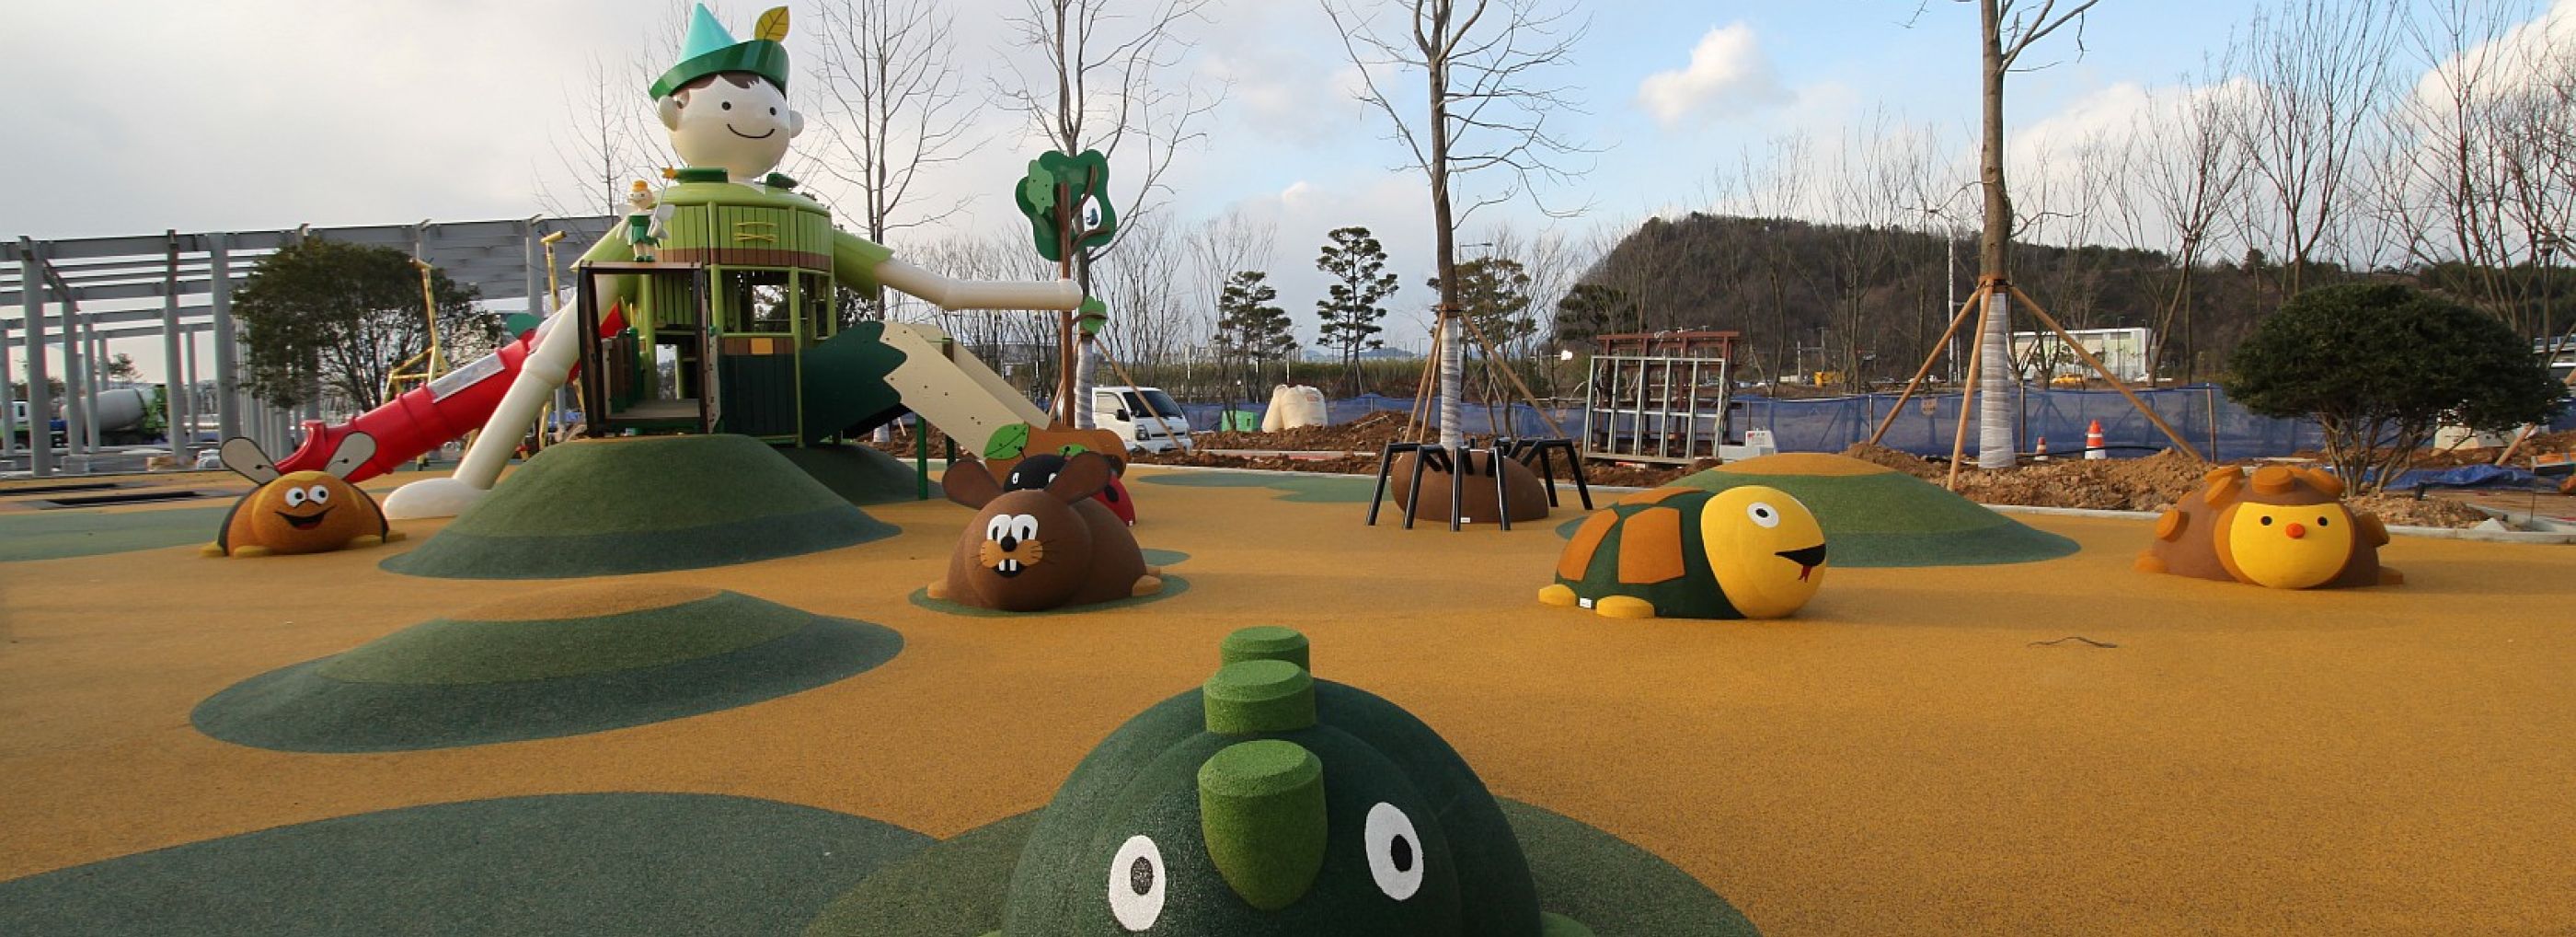 Outdoor playground with a range of 3D play animals including a hedgehog, tortoise and rabbit.